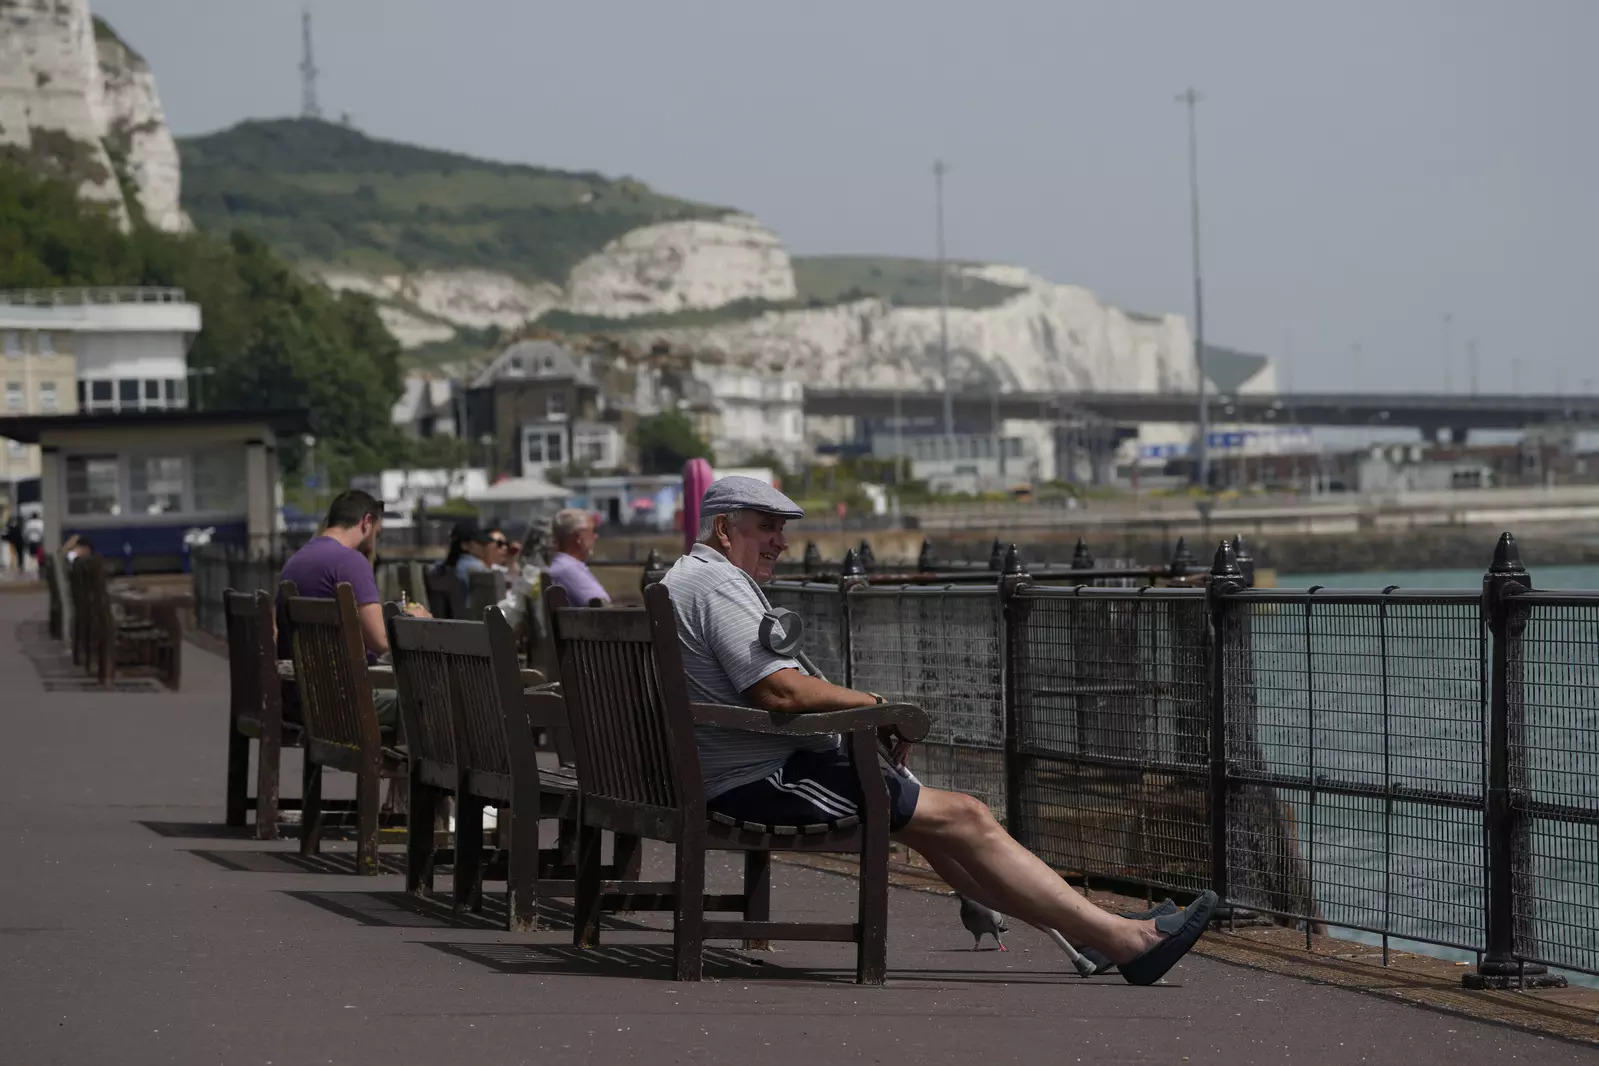 Britain could see hottest temperature on record this week